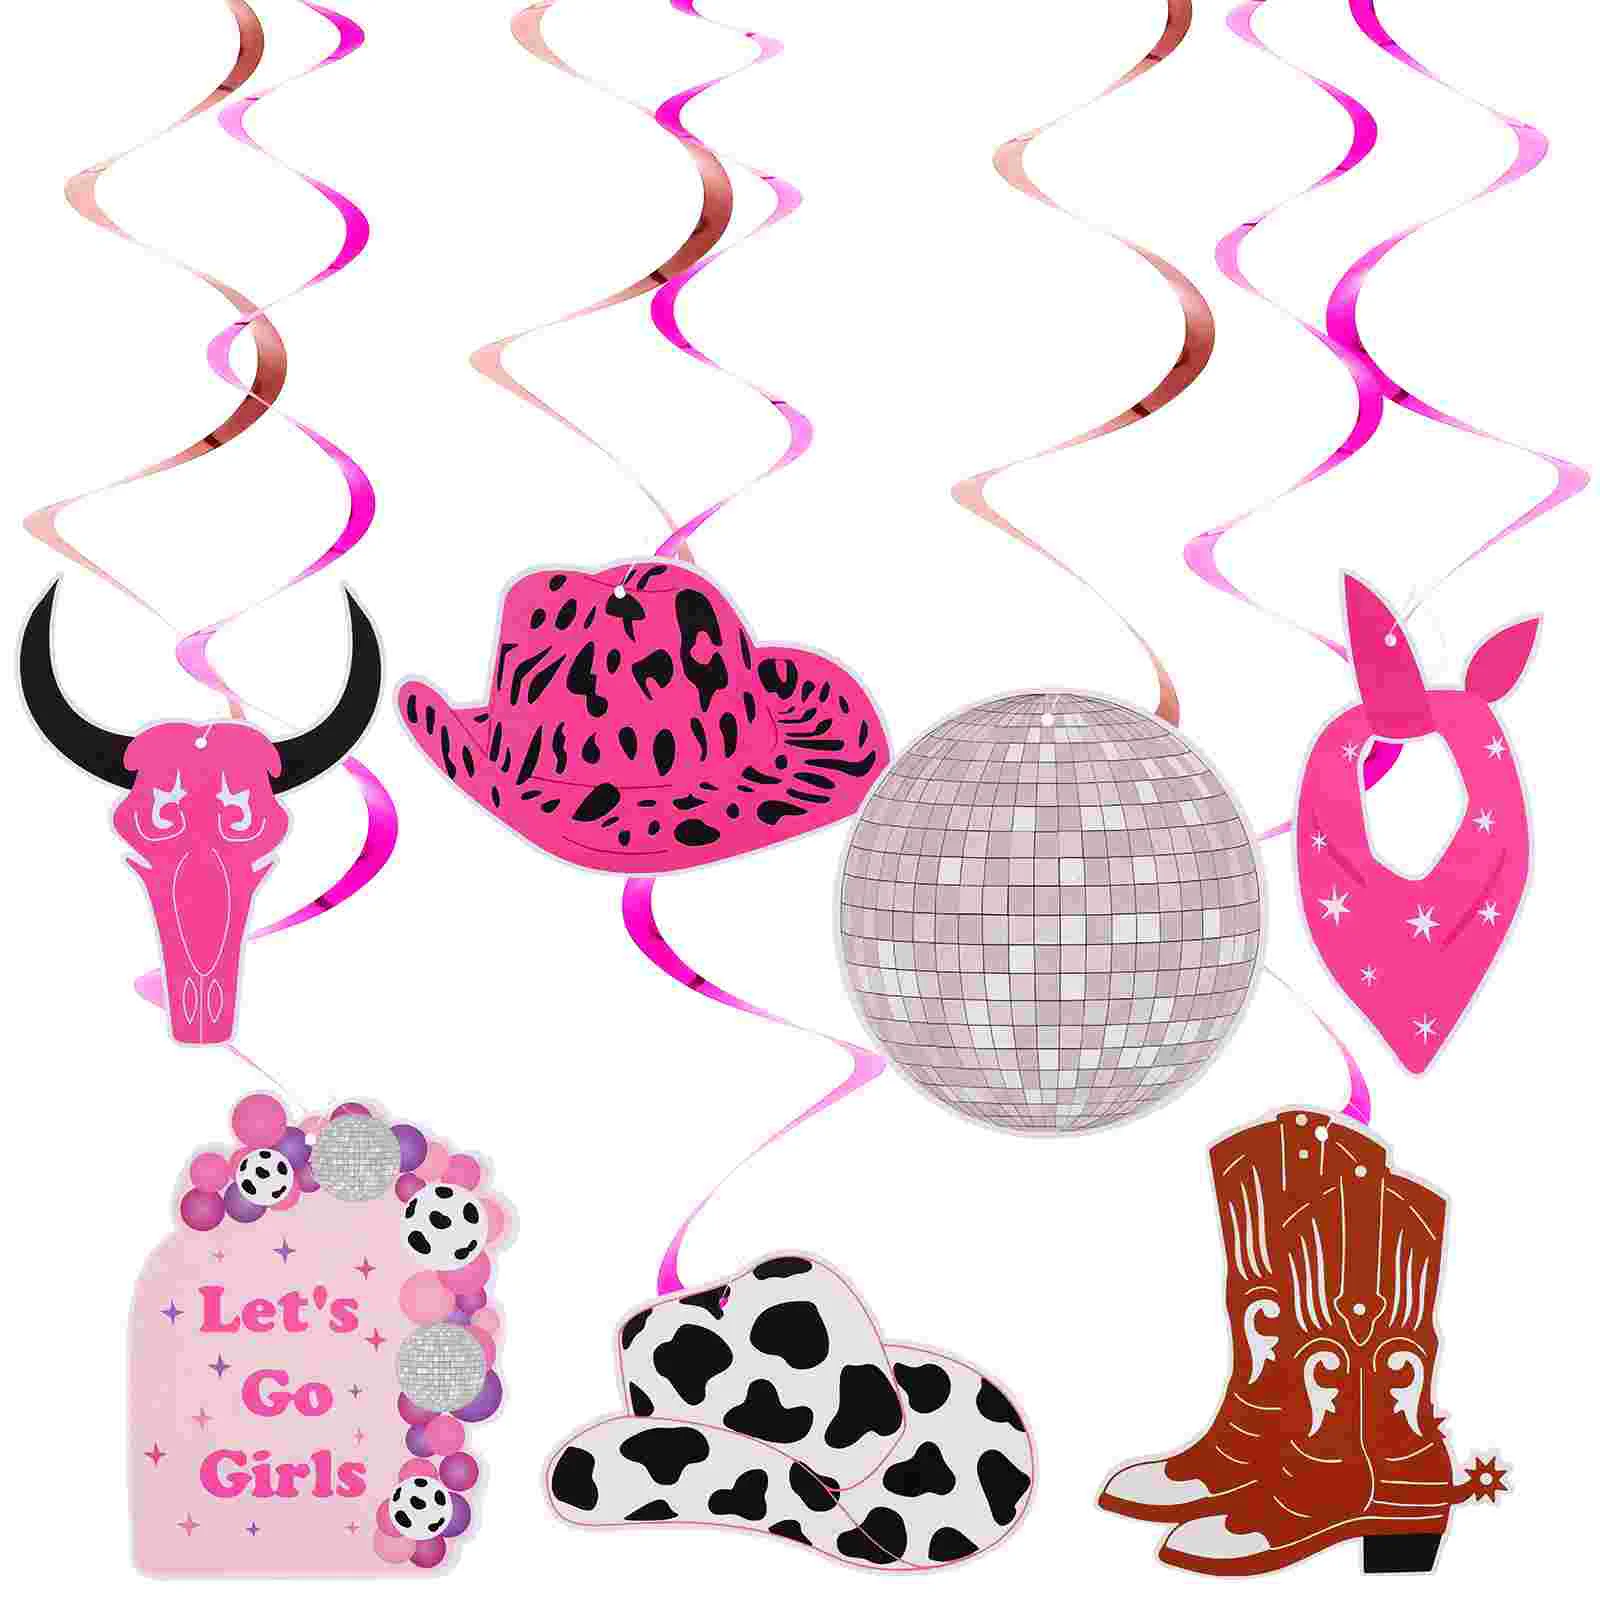 

Cowgirl Party Supplies Festival Hanging Swirl Pink Decor Props Hen Decoration Decorations Birthday Paper Ceiling